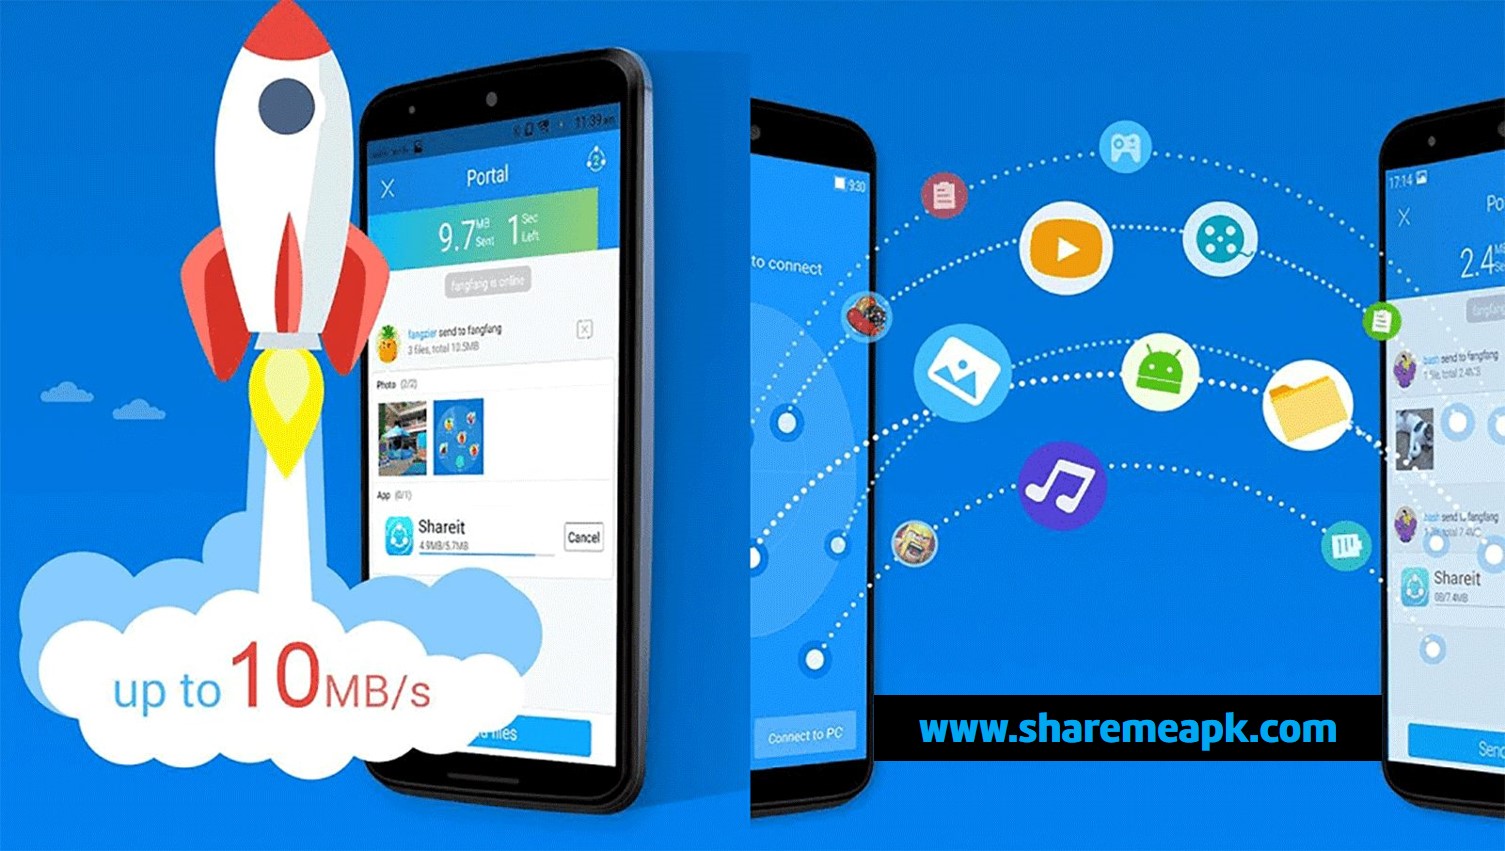 ShareMe APK Download | The fastest way to share files for Free